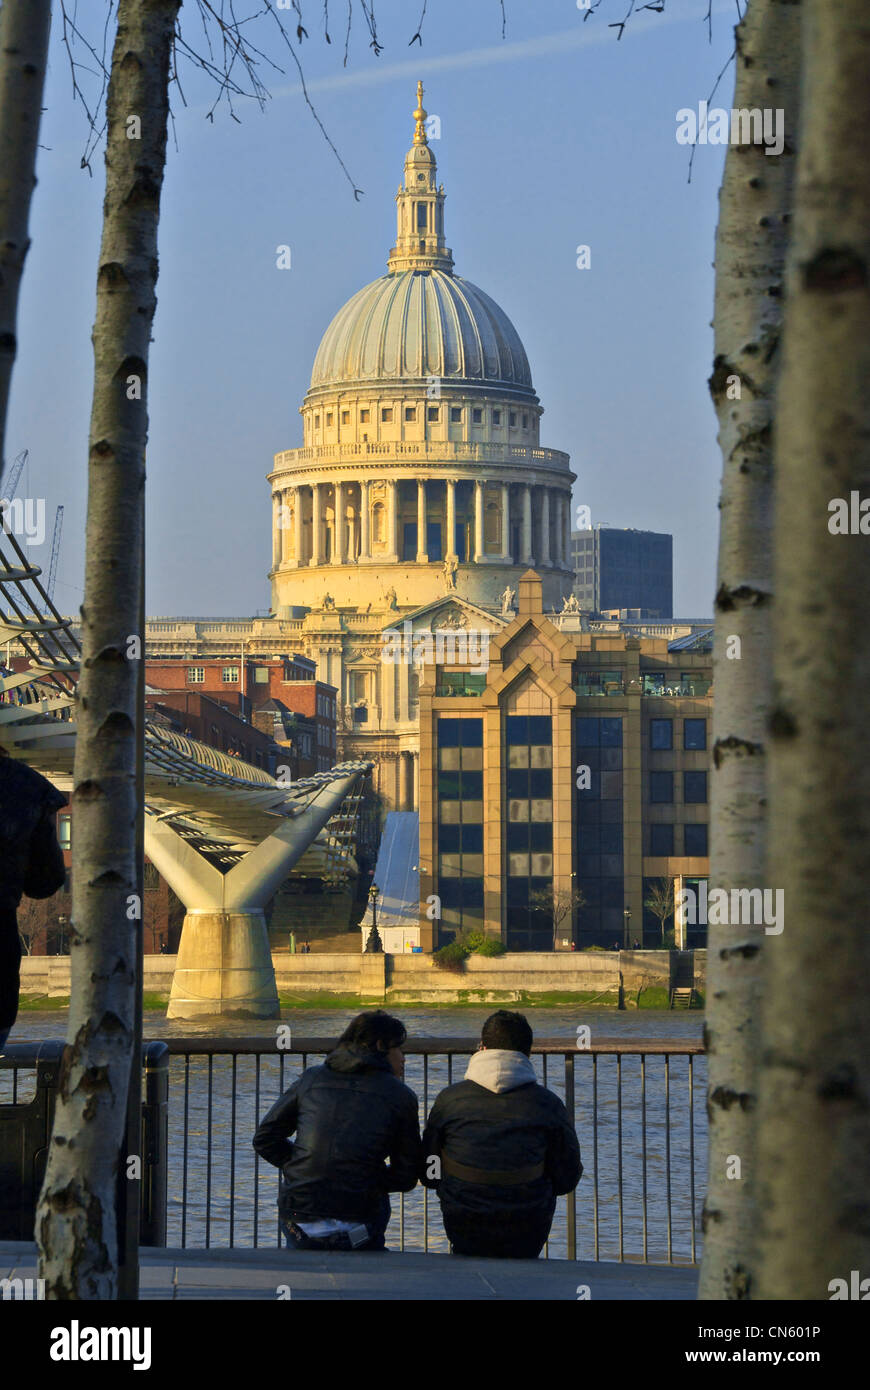 Two onlookers and Saint Paul's Stock Photo